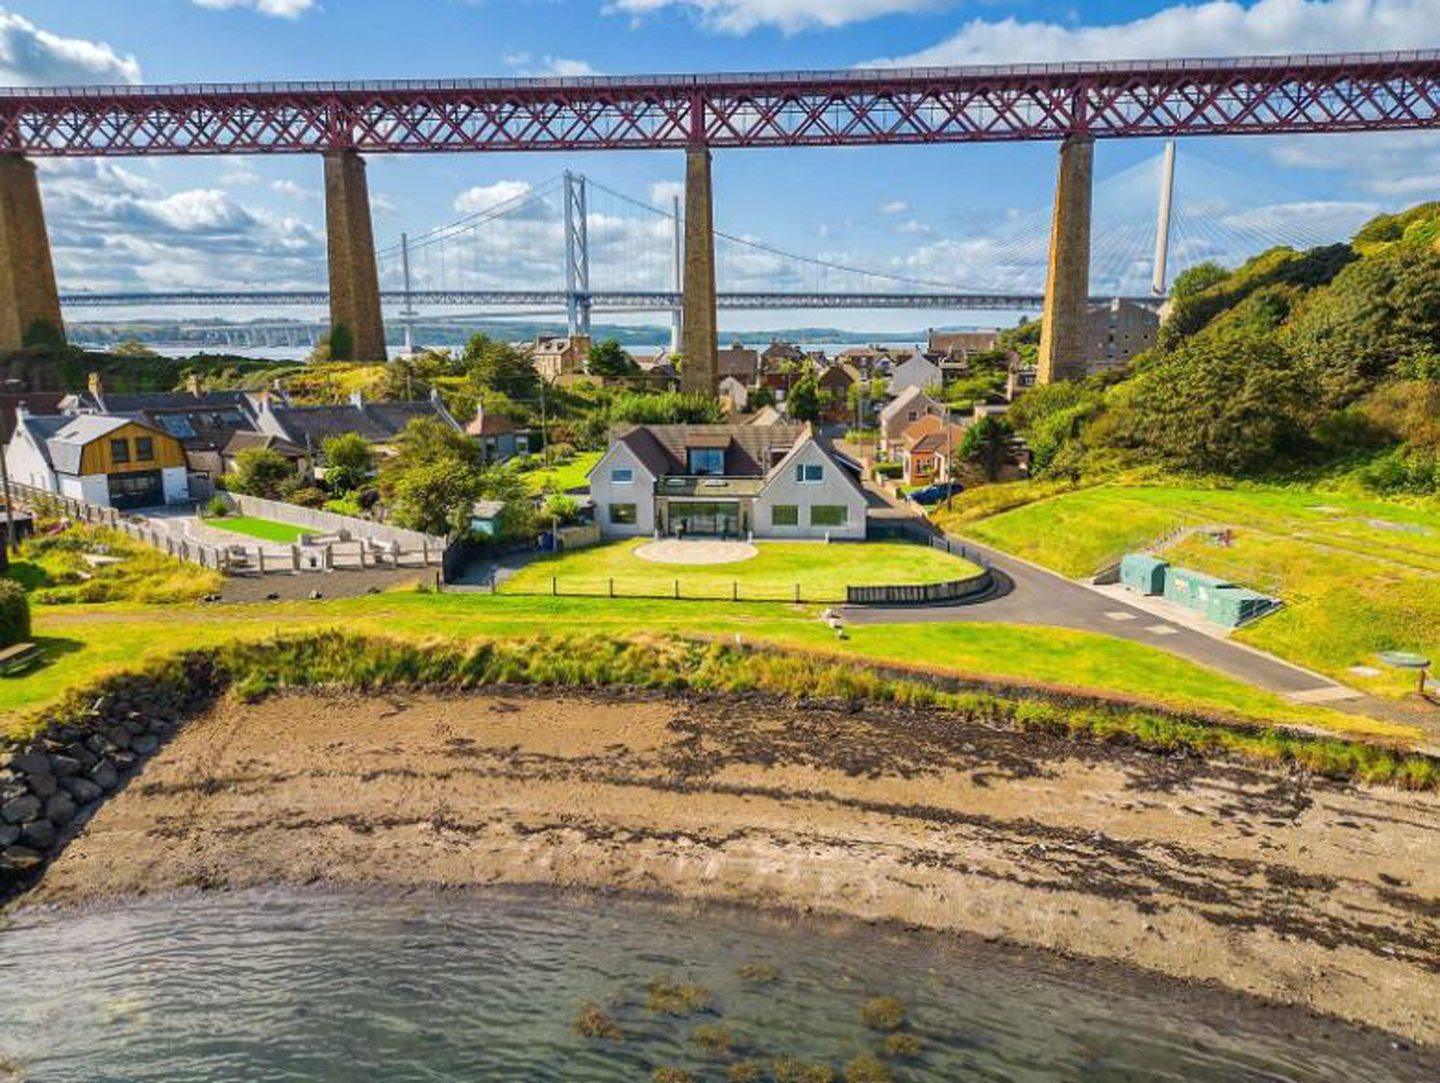 Four-bedroom family home on Helen Lane in North Queensferry has uninterrupted views across the Firth of Forth from almost every room.